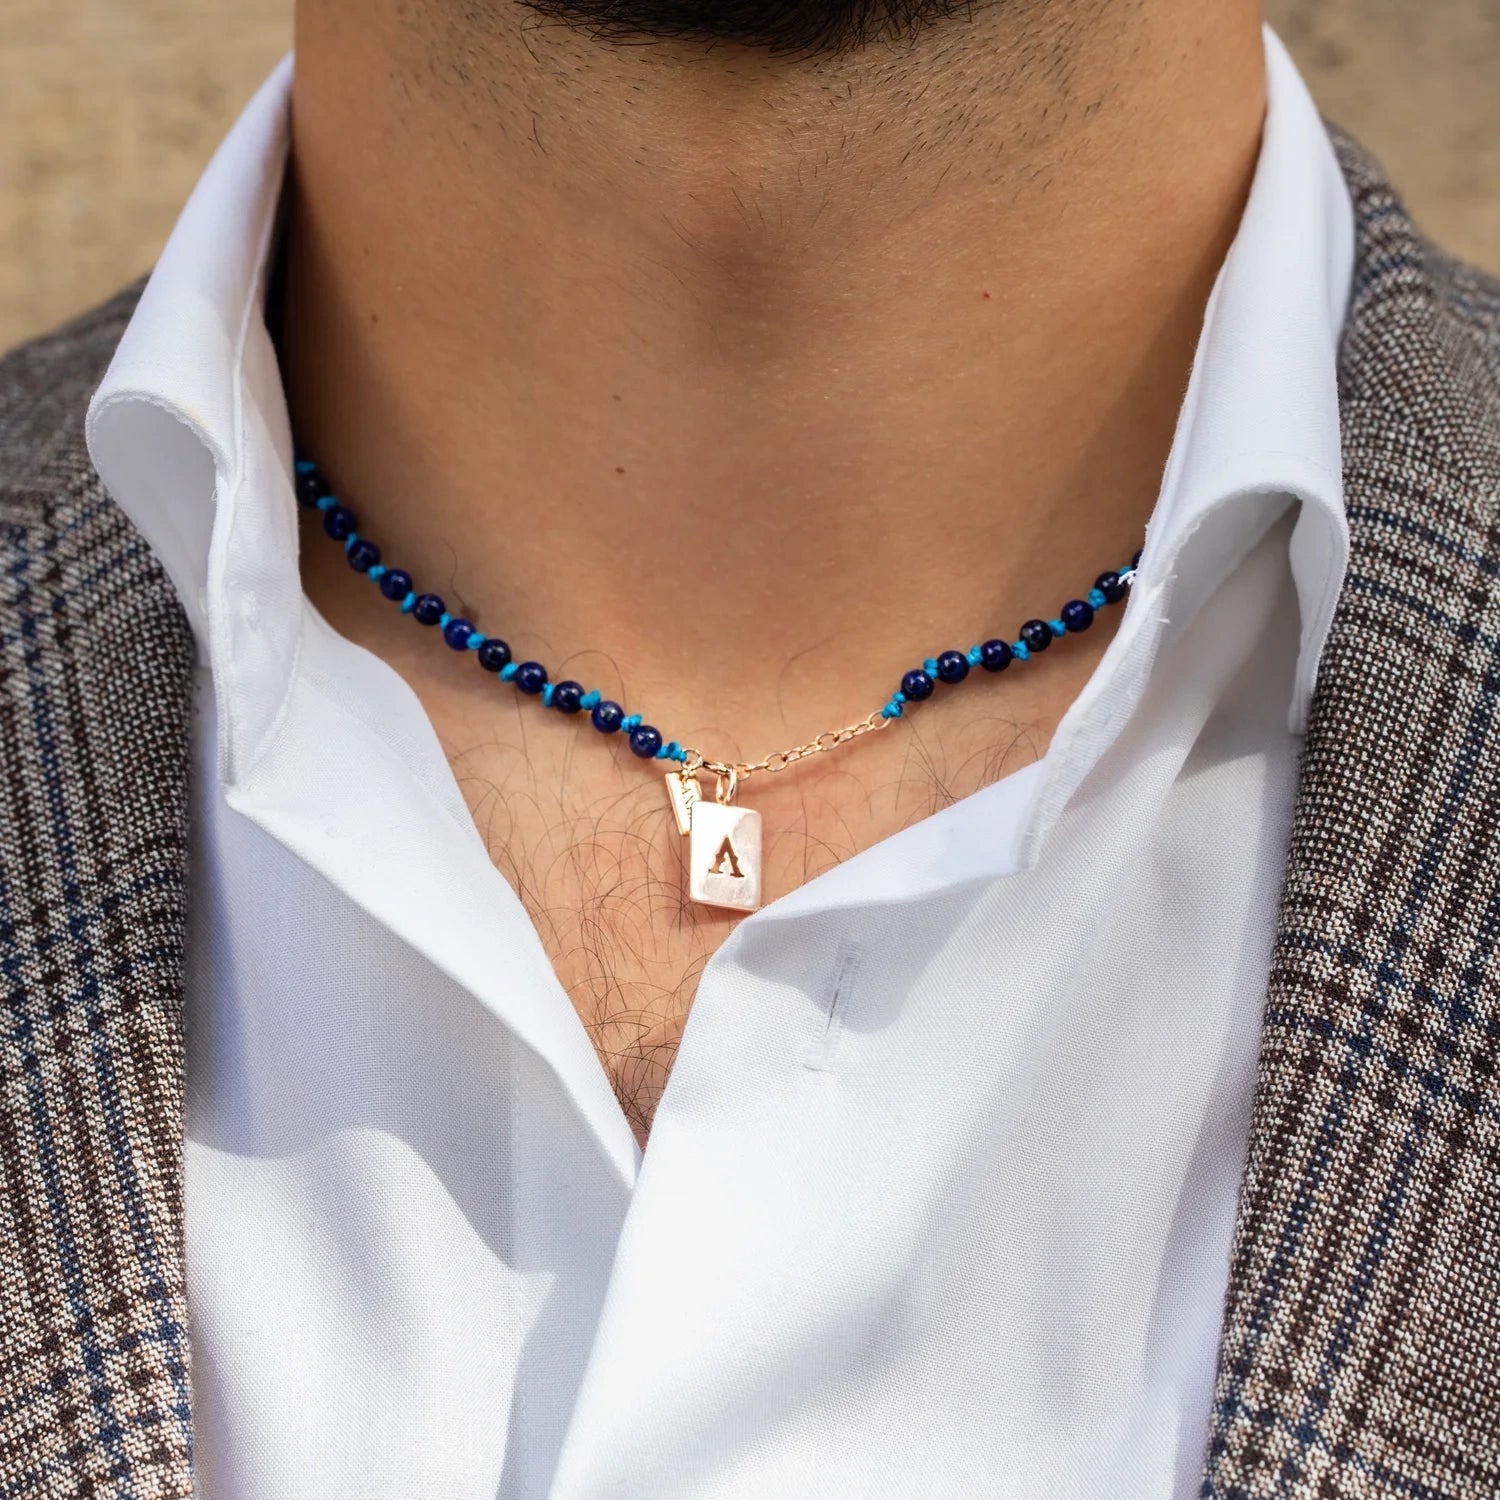 Buy Lapis Lazuli Necklace Blue Beaded Necklaces for Men Women Lapis  Rondelle Necklace Lapis Lazuli Jewelry Gift for Man Woman Handmade Jewelry  Online in India - Etsy